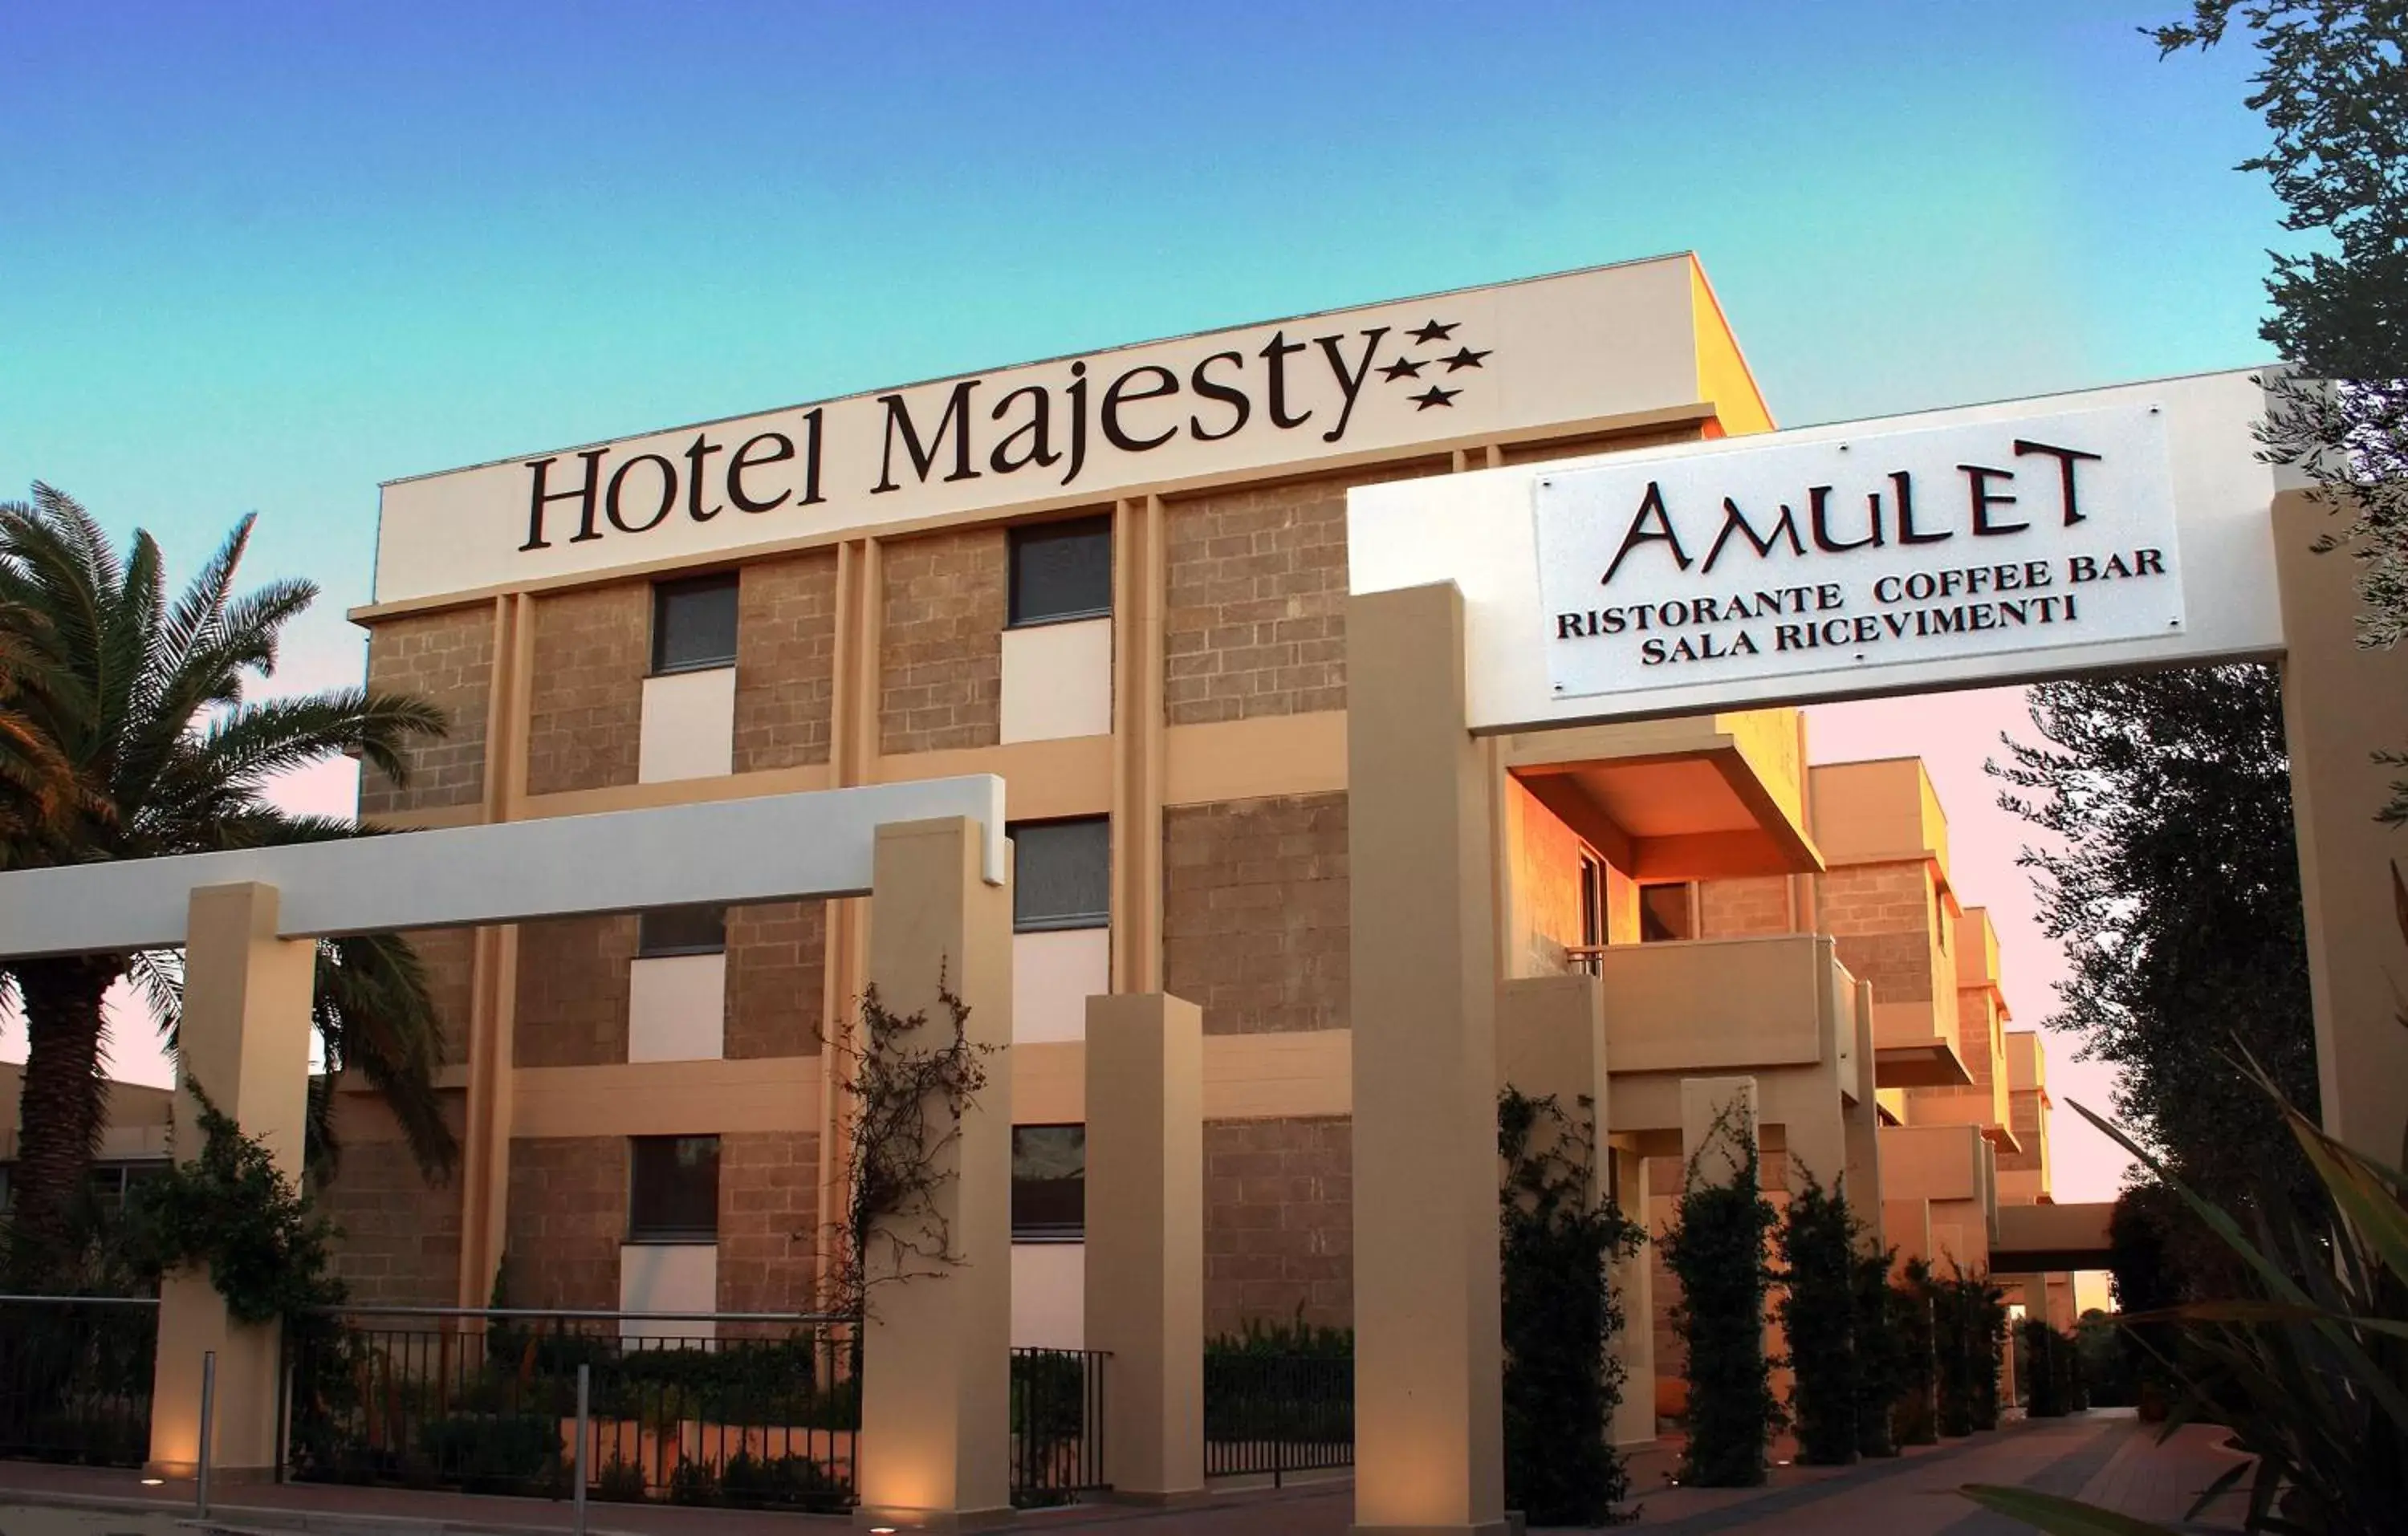 Property building in Hotel Majesty Bari